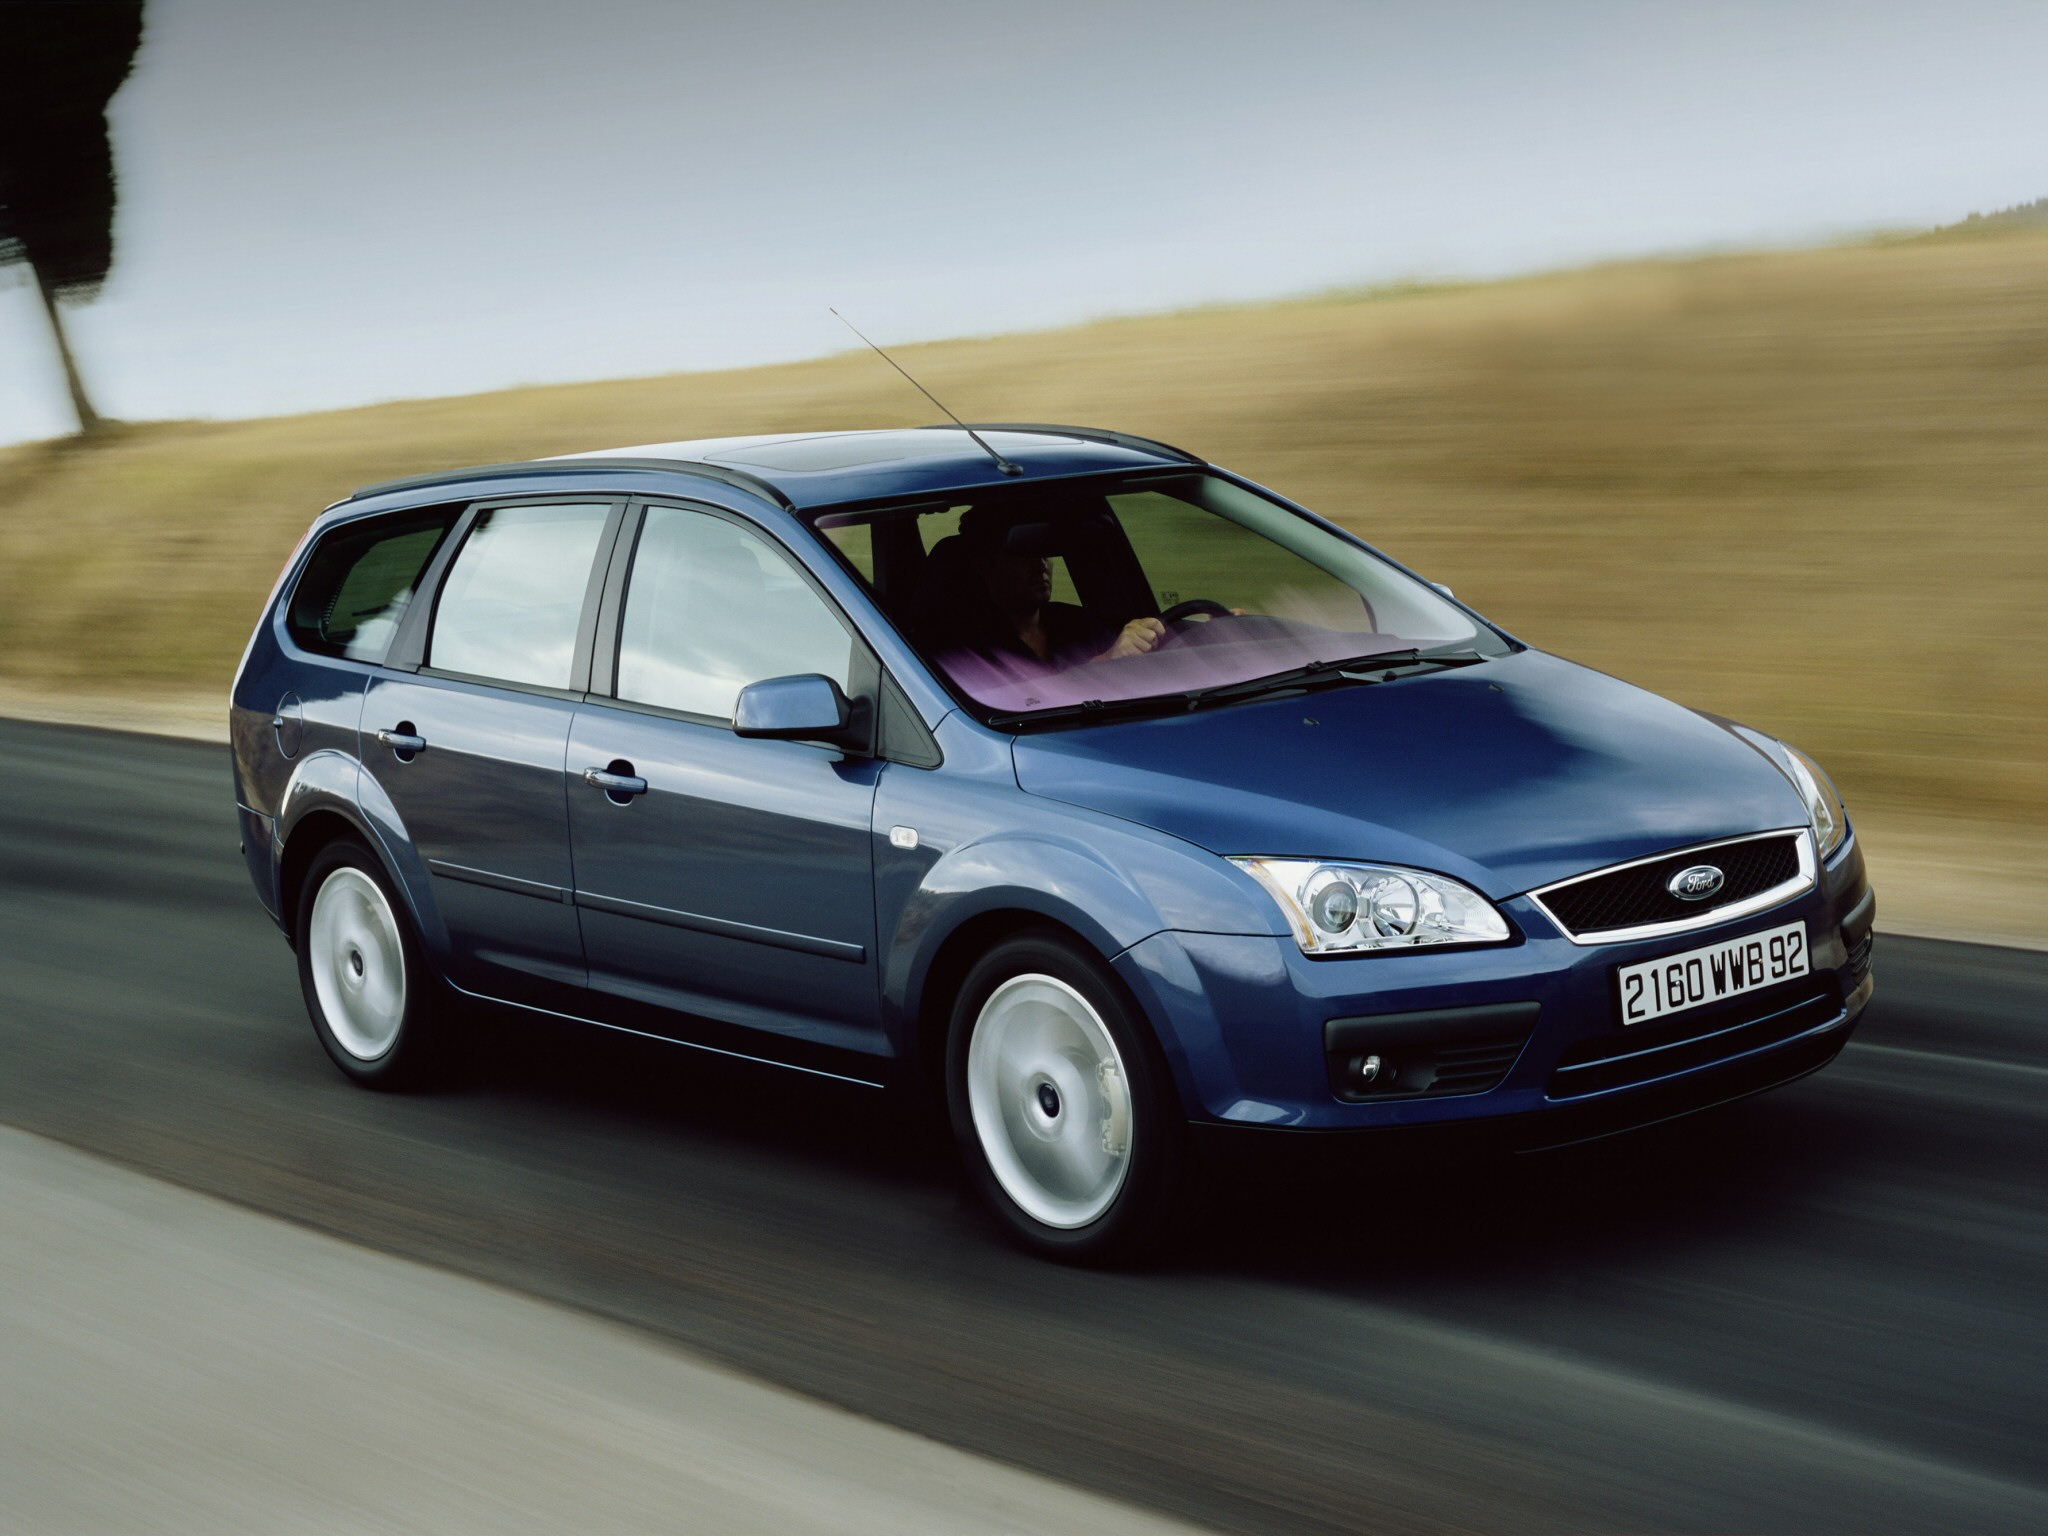 Car In Pictures Car Photo Gallery Ford Focus Wagon 2005 Photo 06